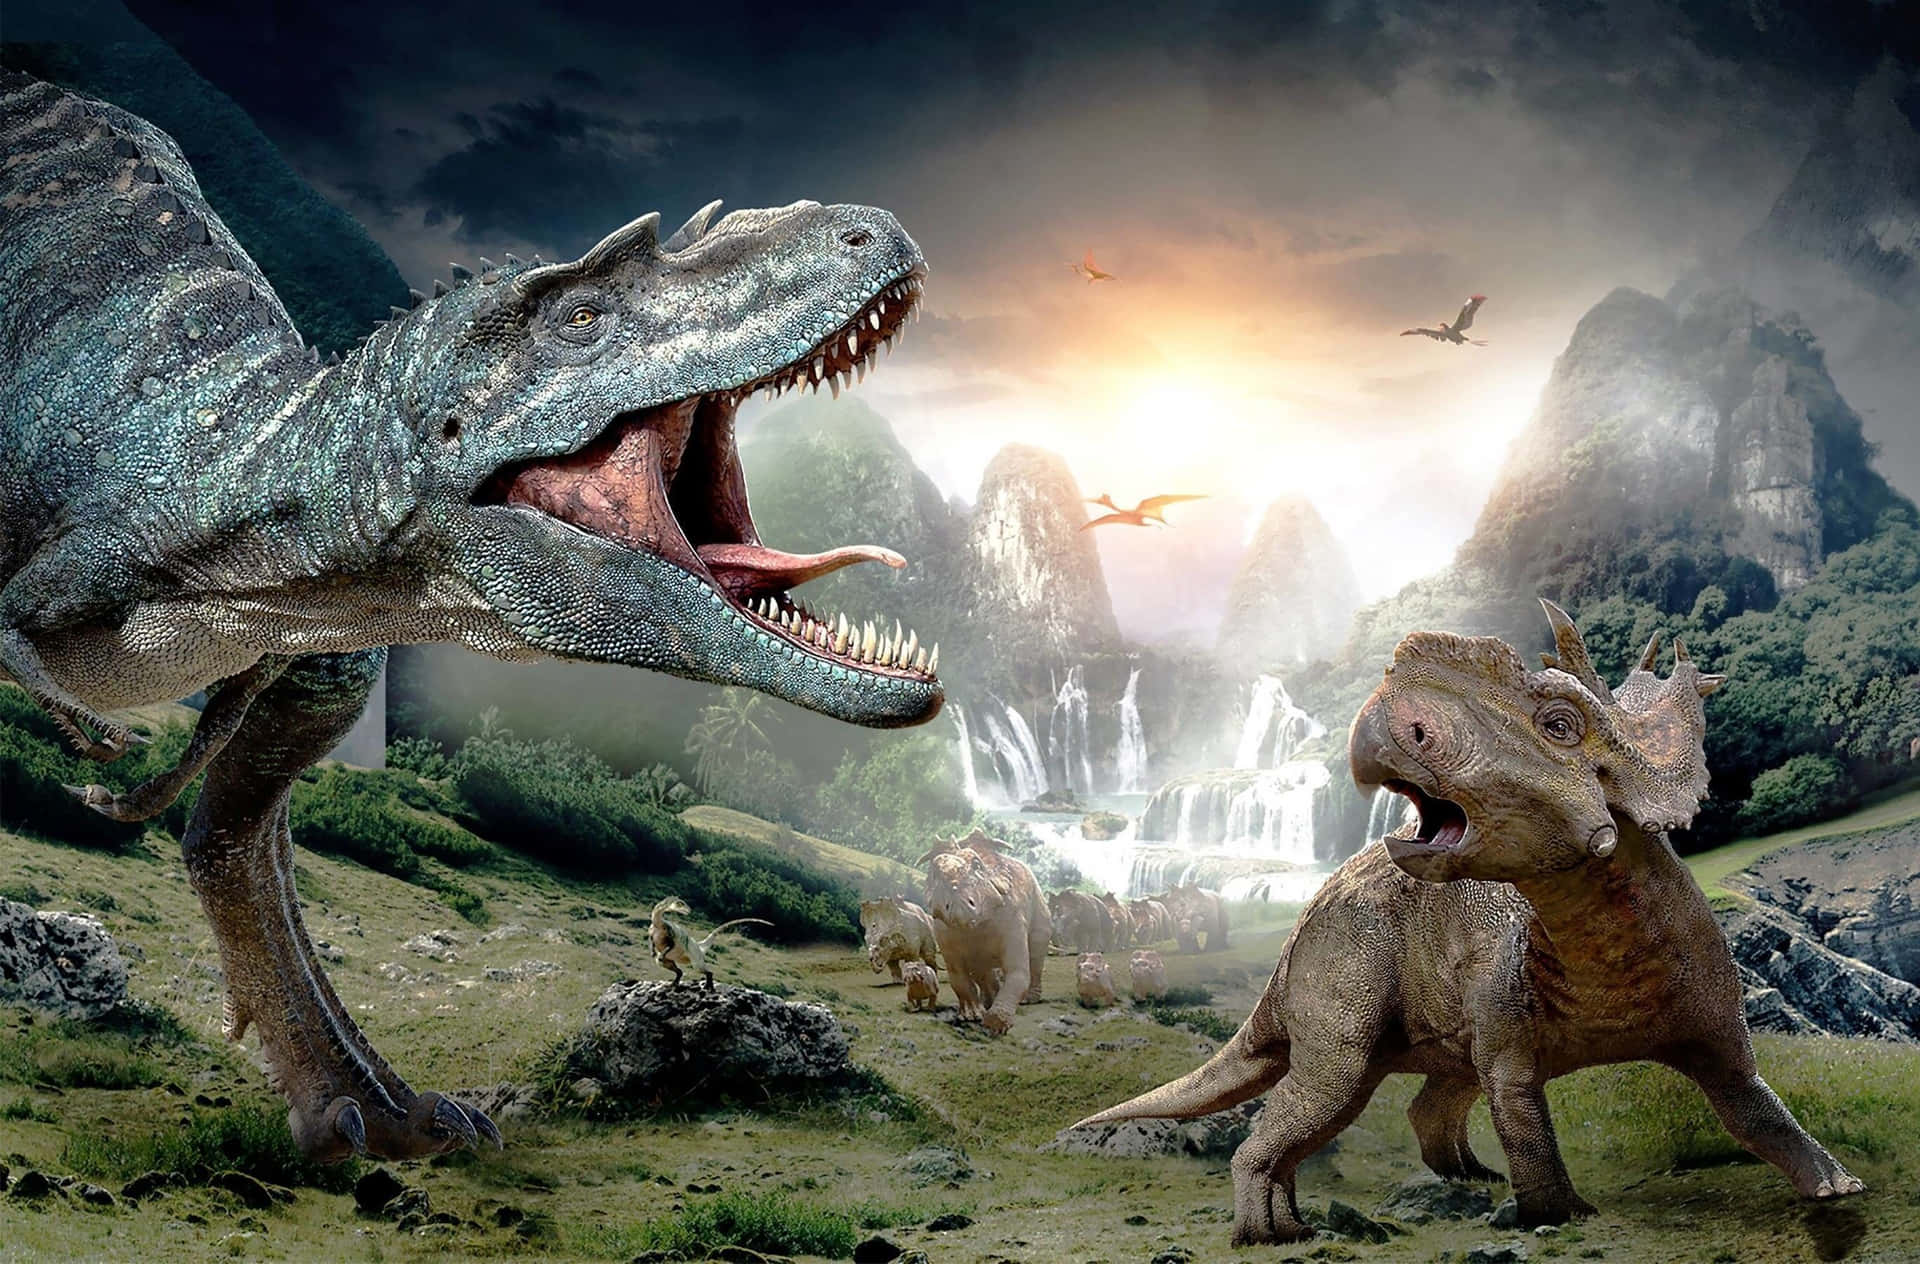 A giant herbivore dinosaur stands in a beautiful, mysterious landscape